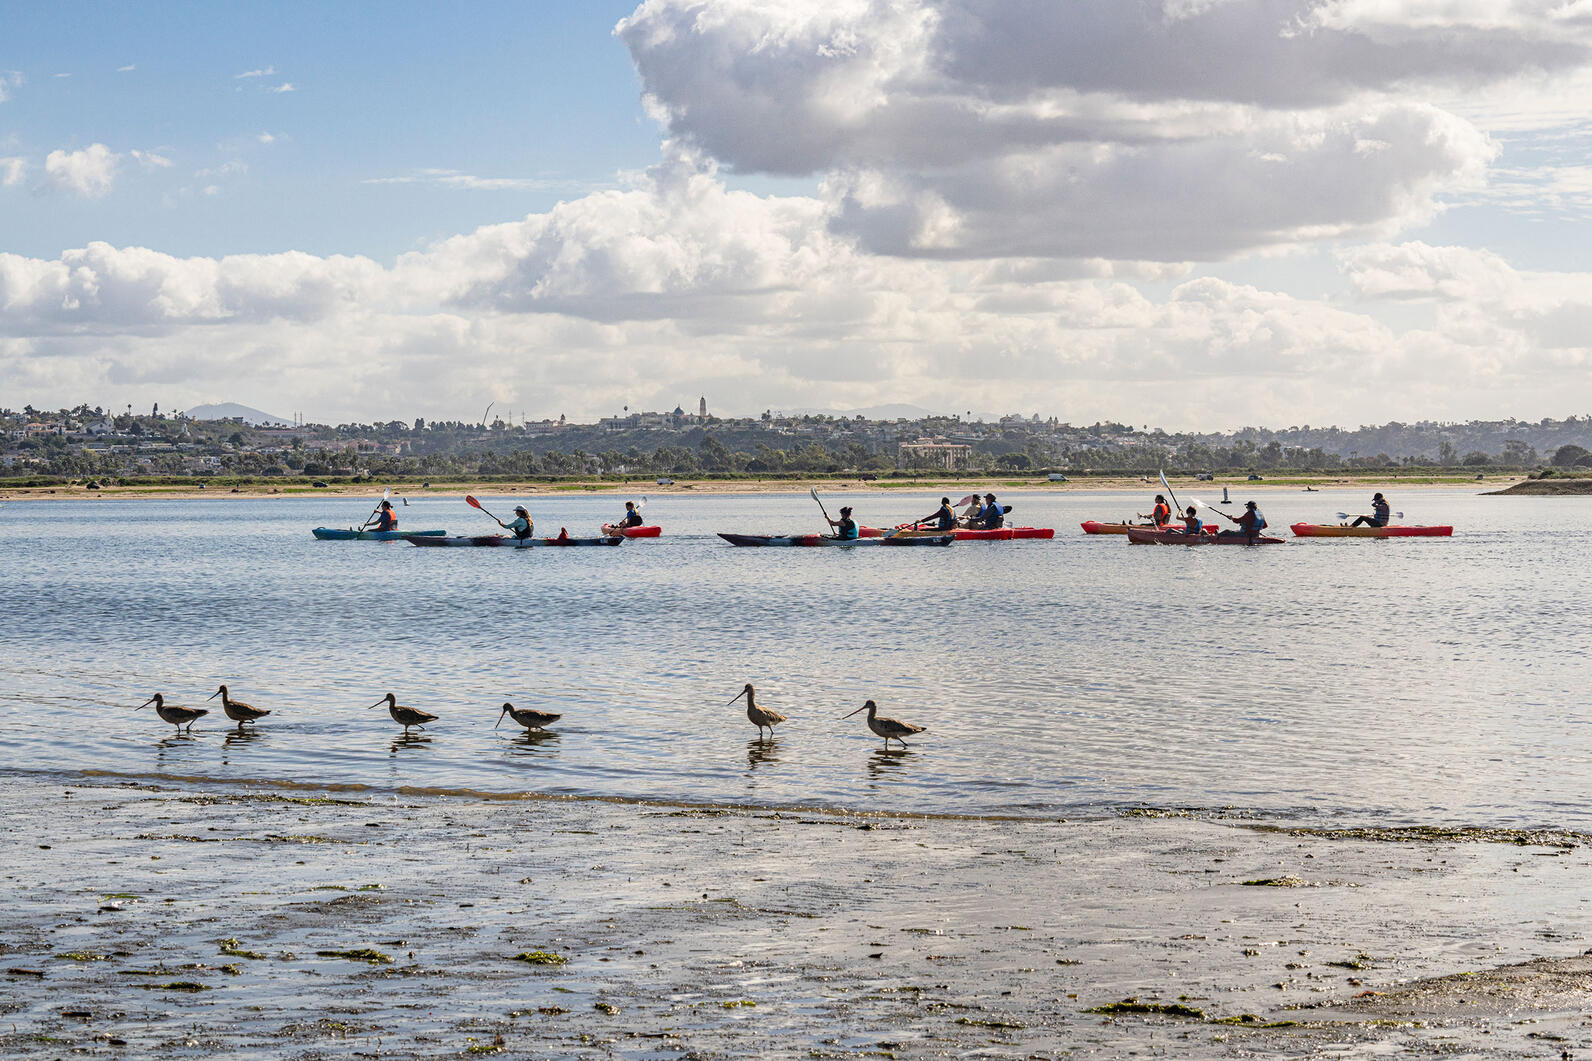 Kayakers float by on Mission Bay while shorebirds stand in the foreground.